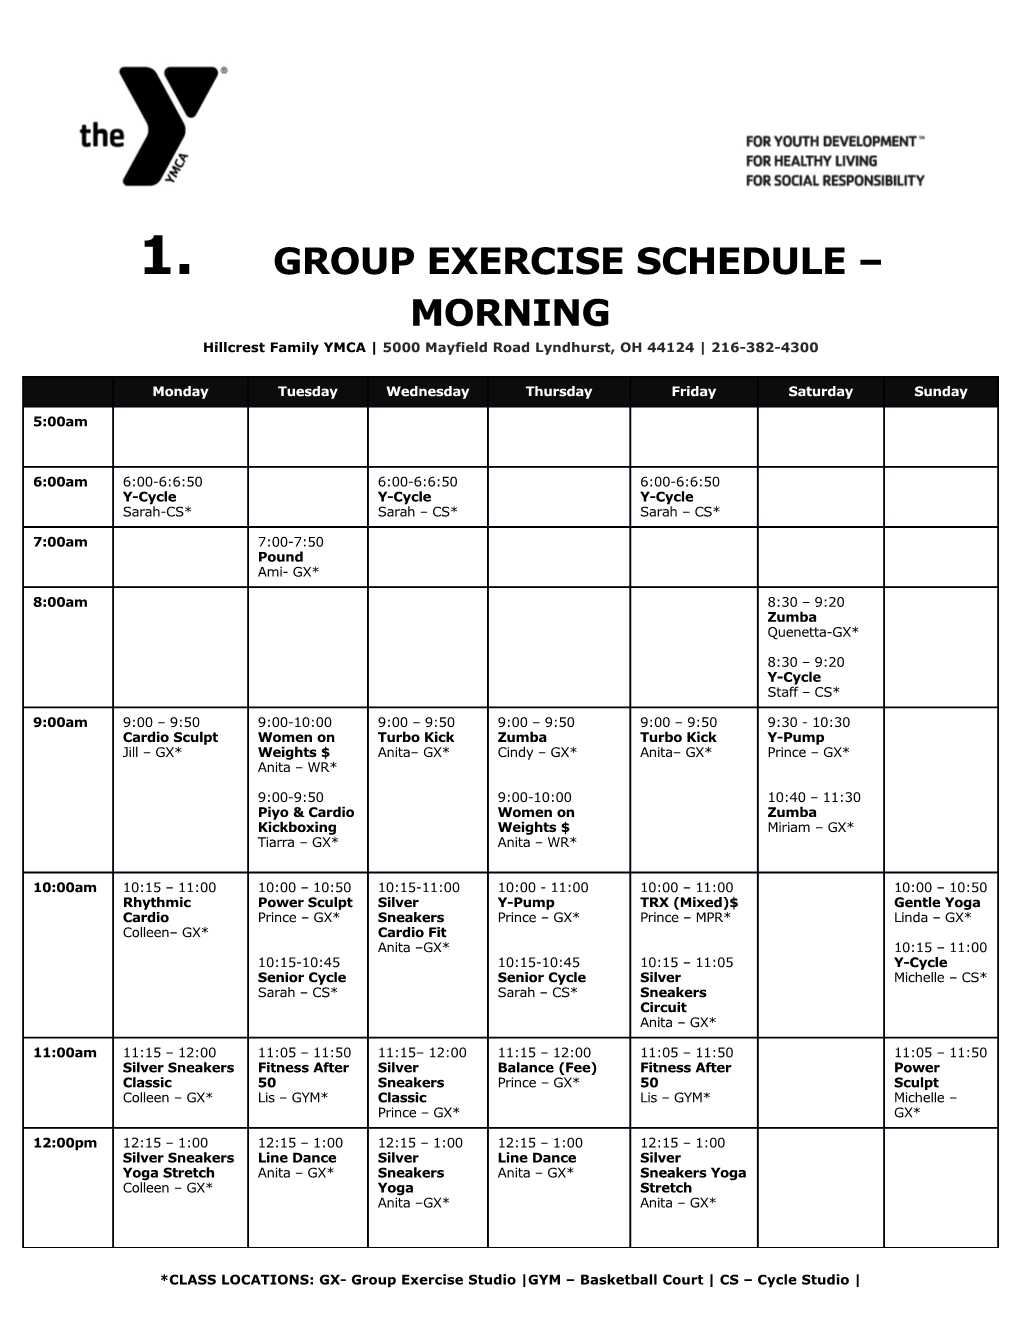 Group Exercise Schedule Morning